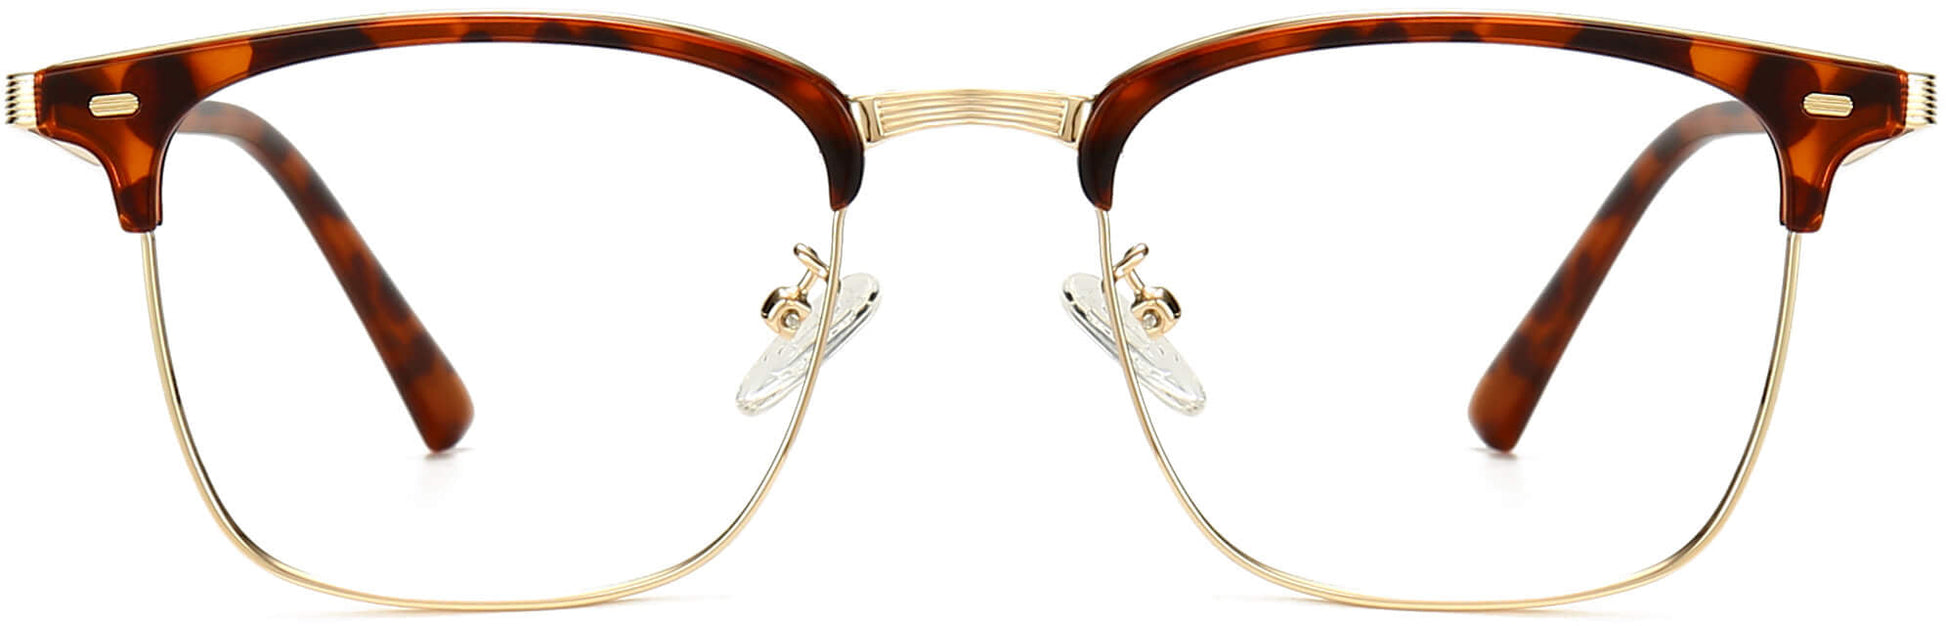 Finnley Browline Tortoise Eyeglasses from ANRRI, front view